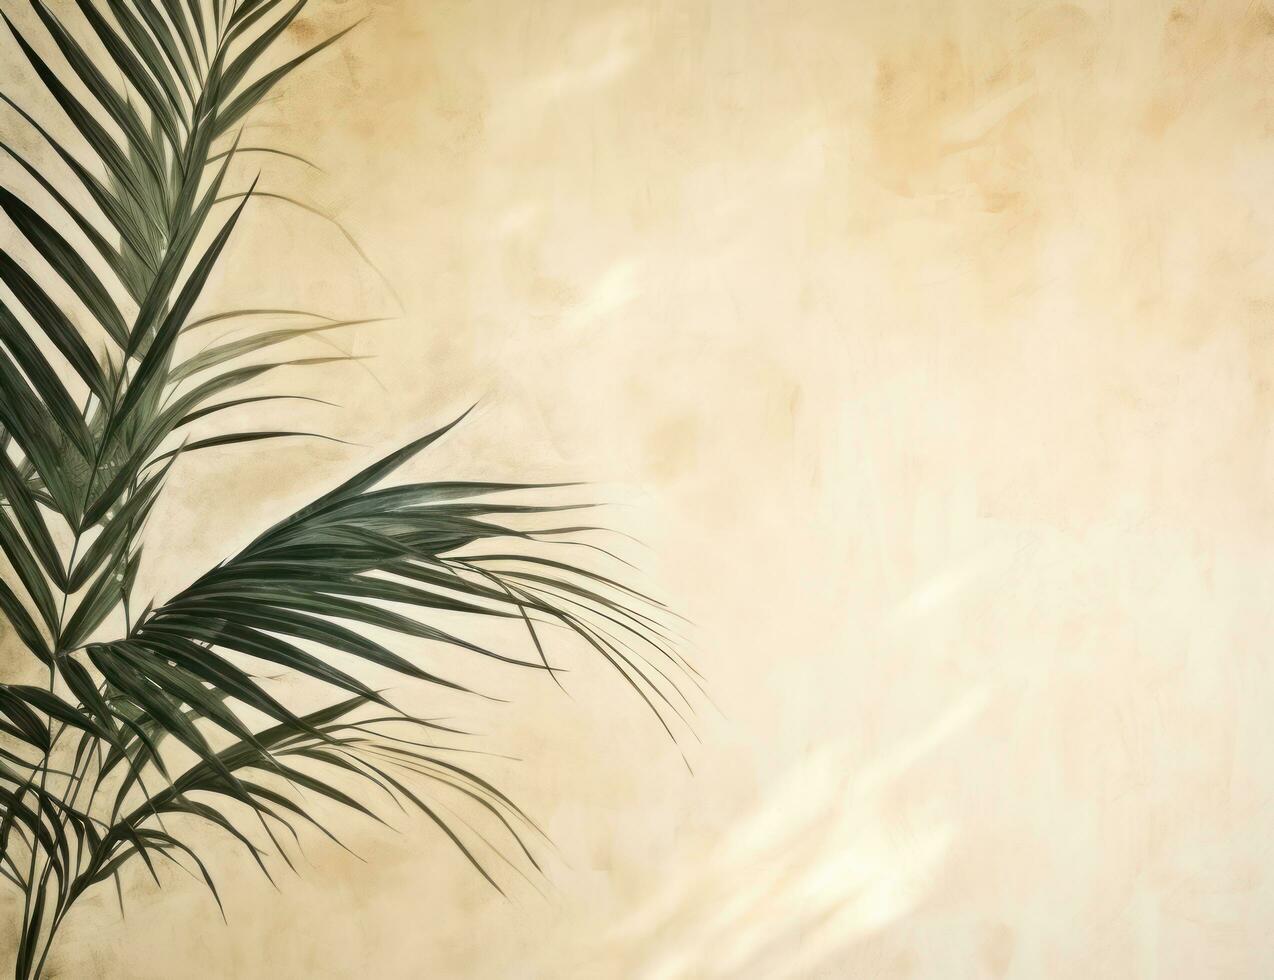 Beige background with palm leaves photo